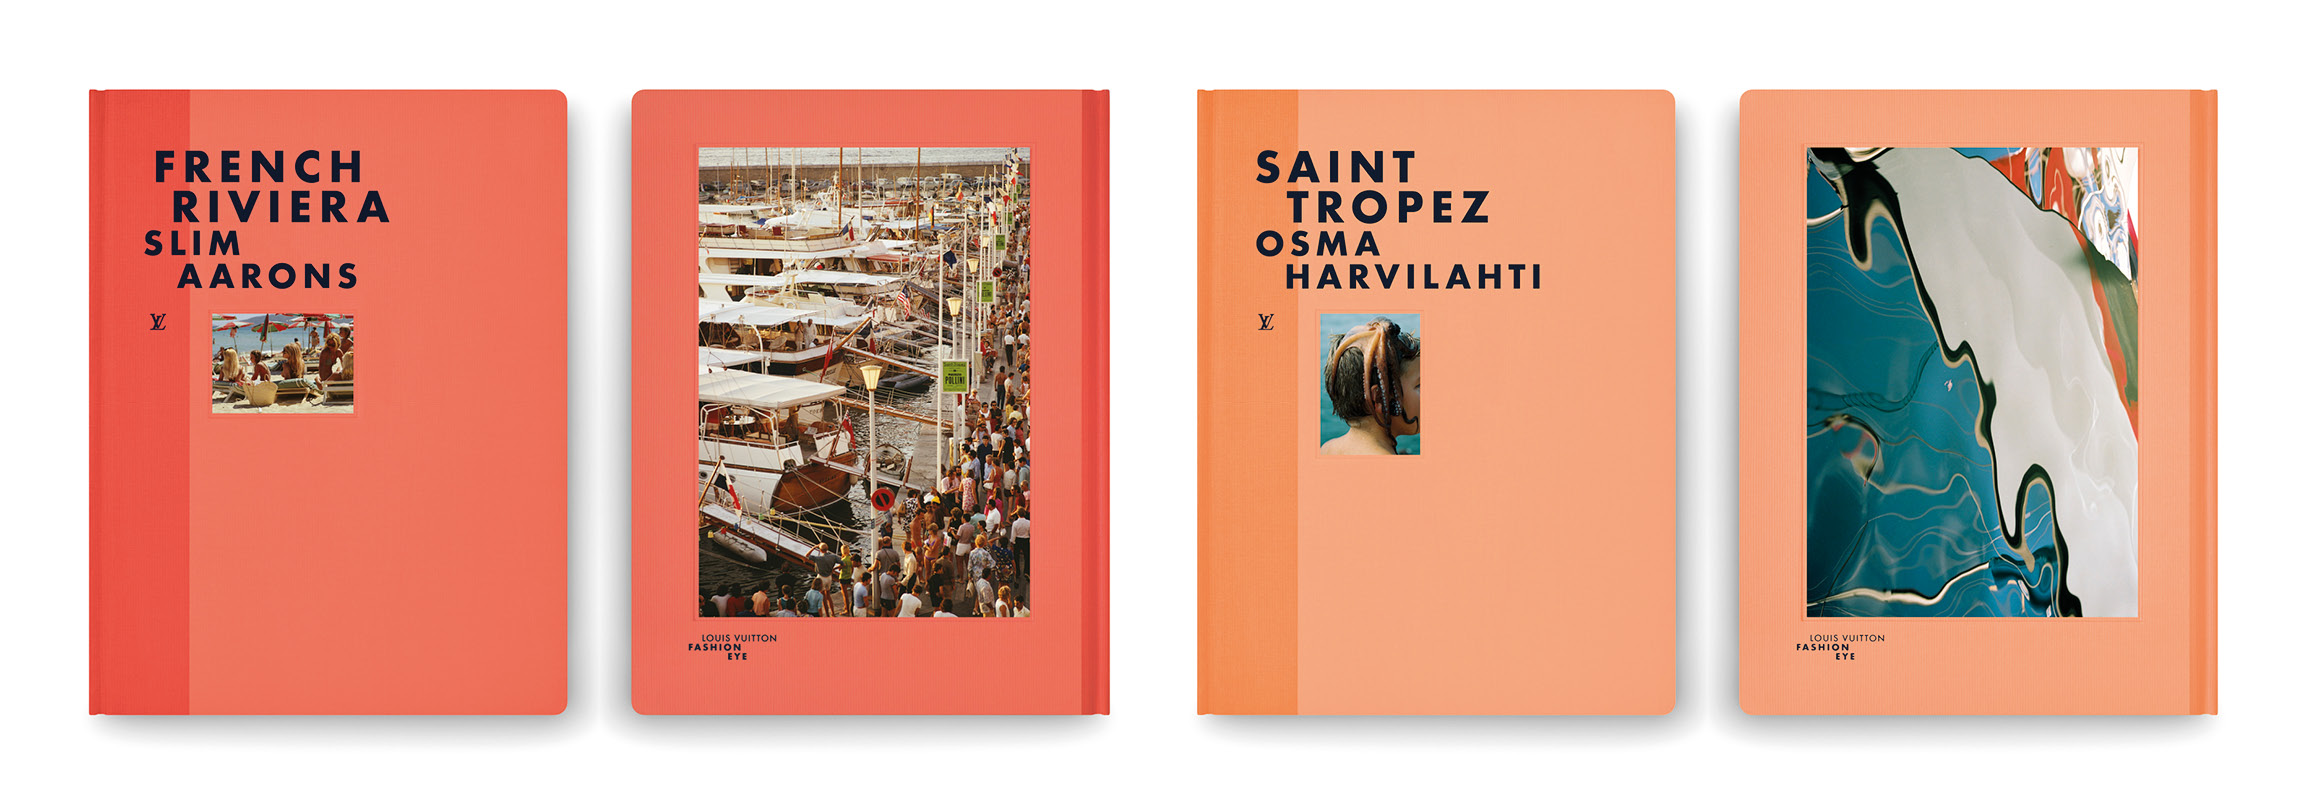 Photography Book - Two new photography books are joining the